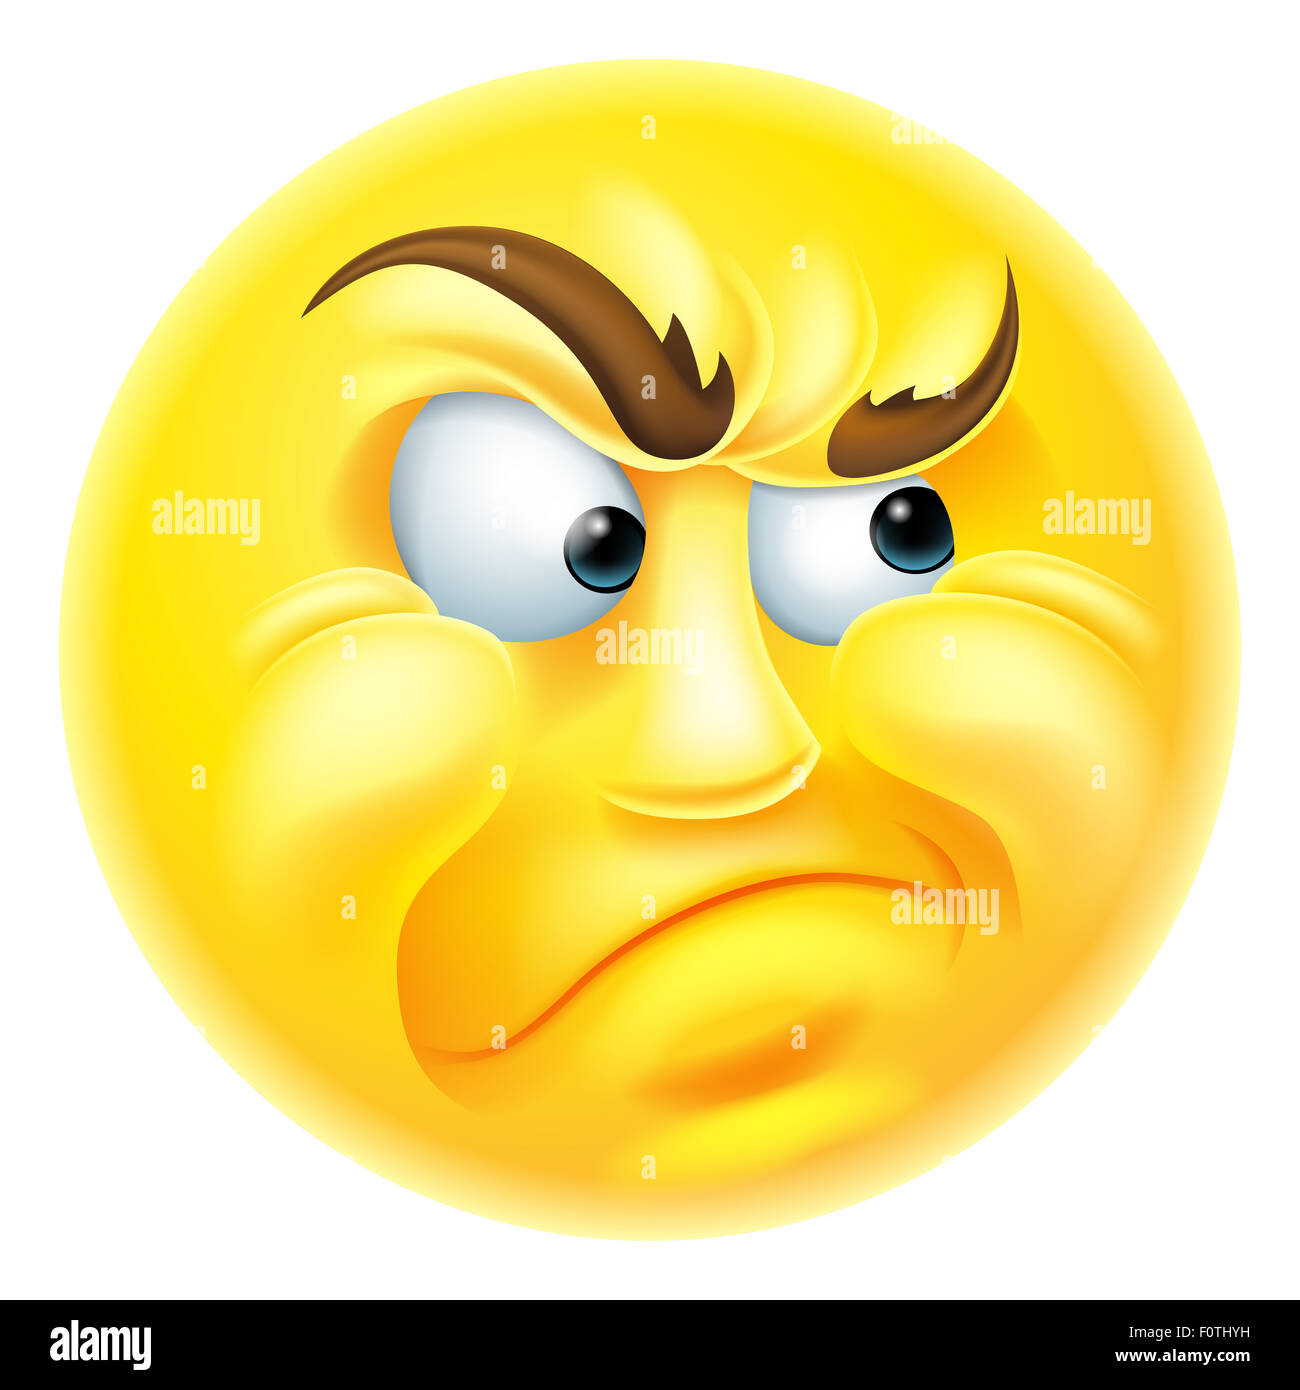 Angry or jealous looking emoticon emoji character Stock Photo